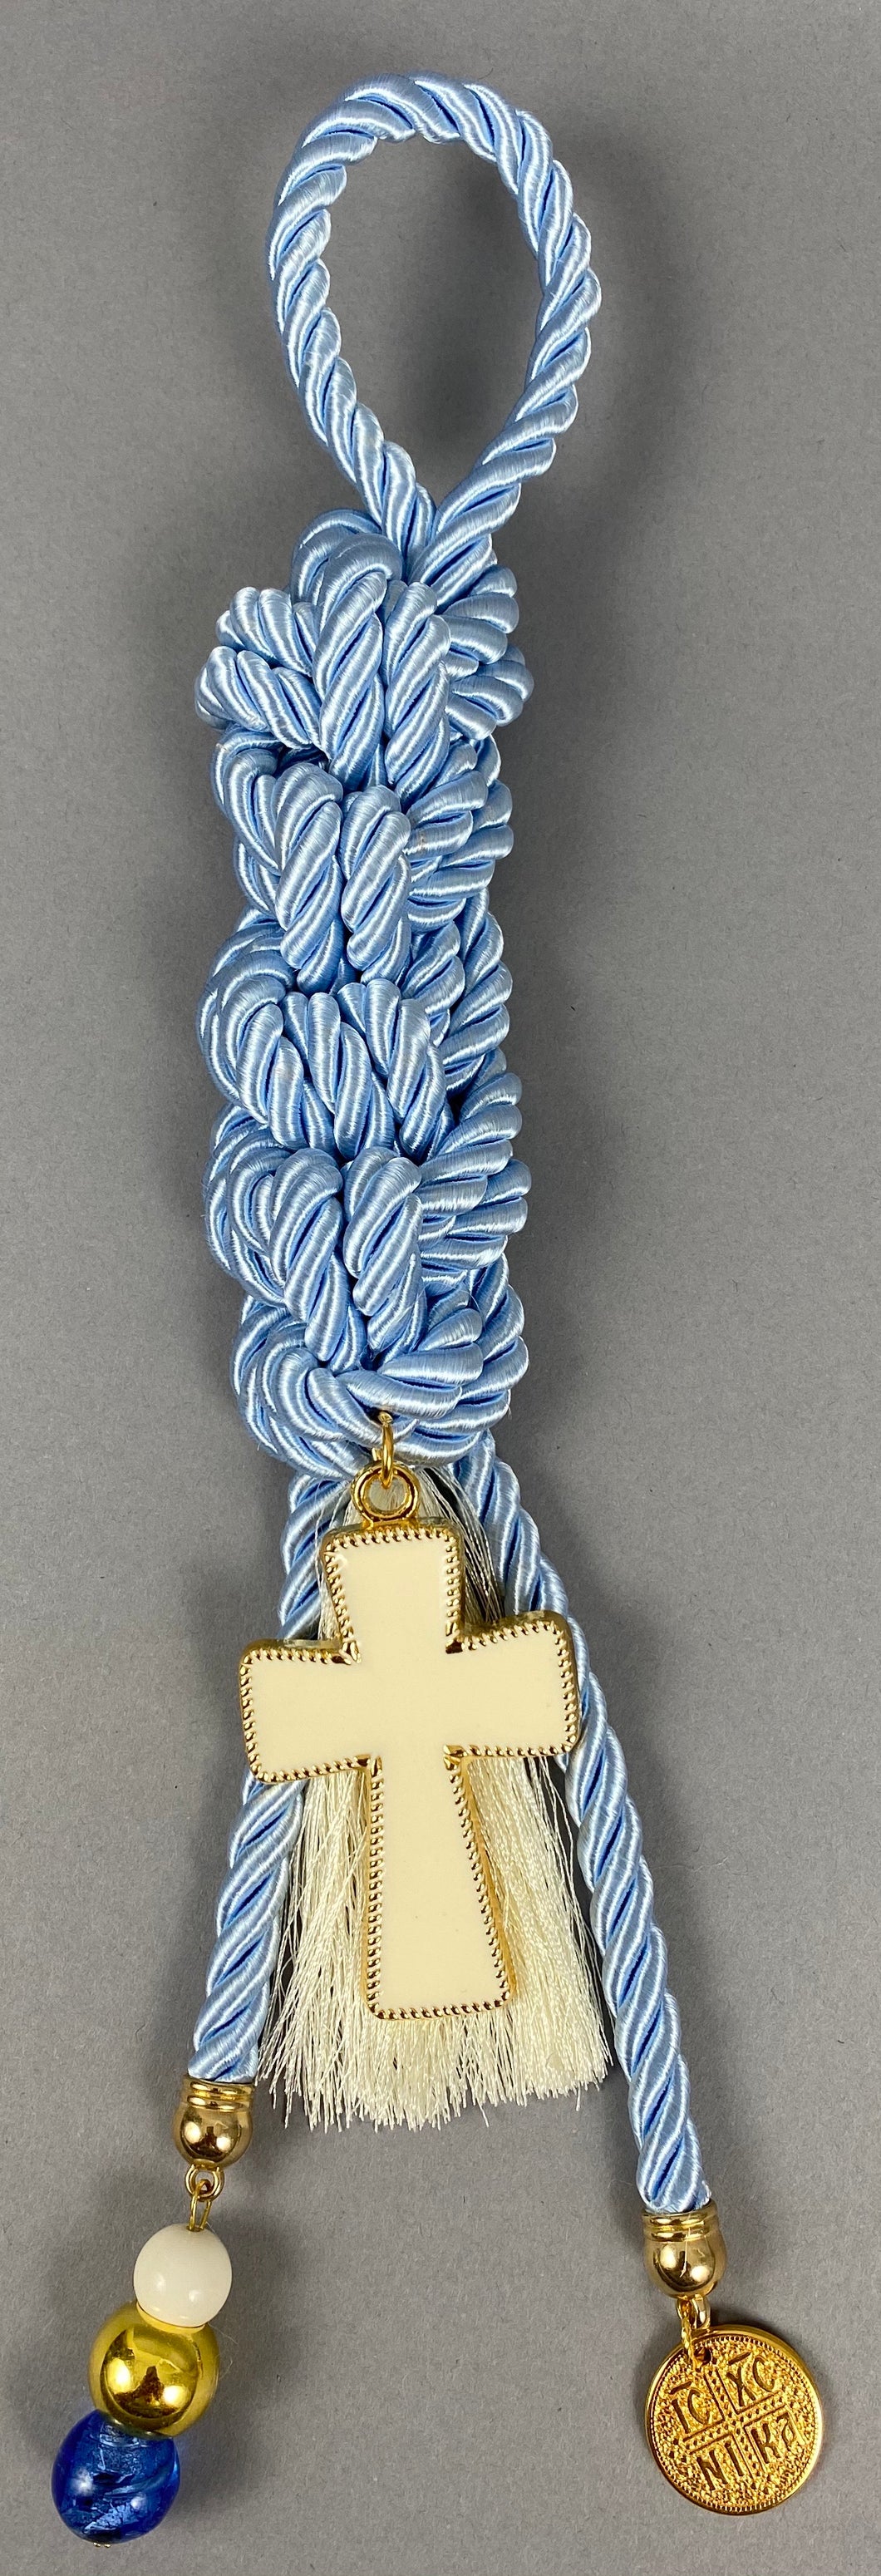 Gouri 1001 Pearl Baby Blue Cord Gouri, large metal Cross, double sided  Konstantinata  pendant, large beads with Murano Glass and Tassel.  Measures 13.5” in length.